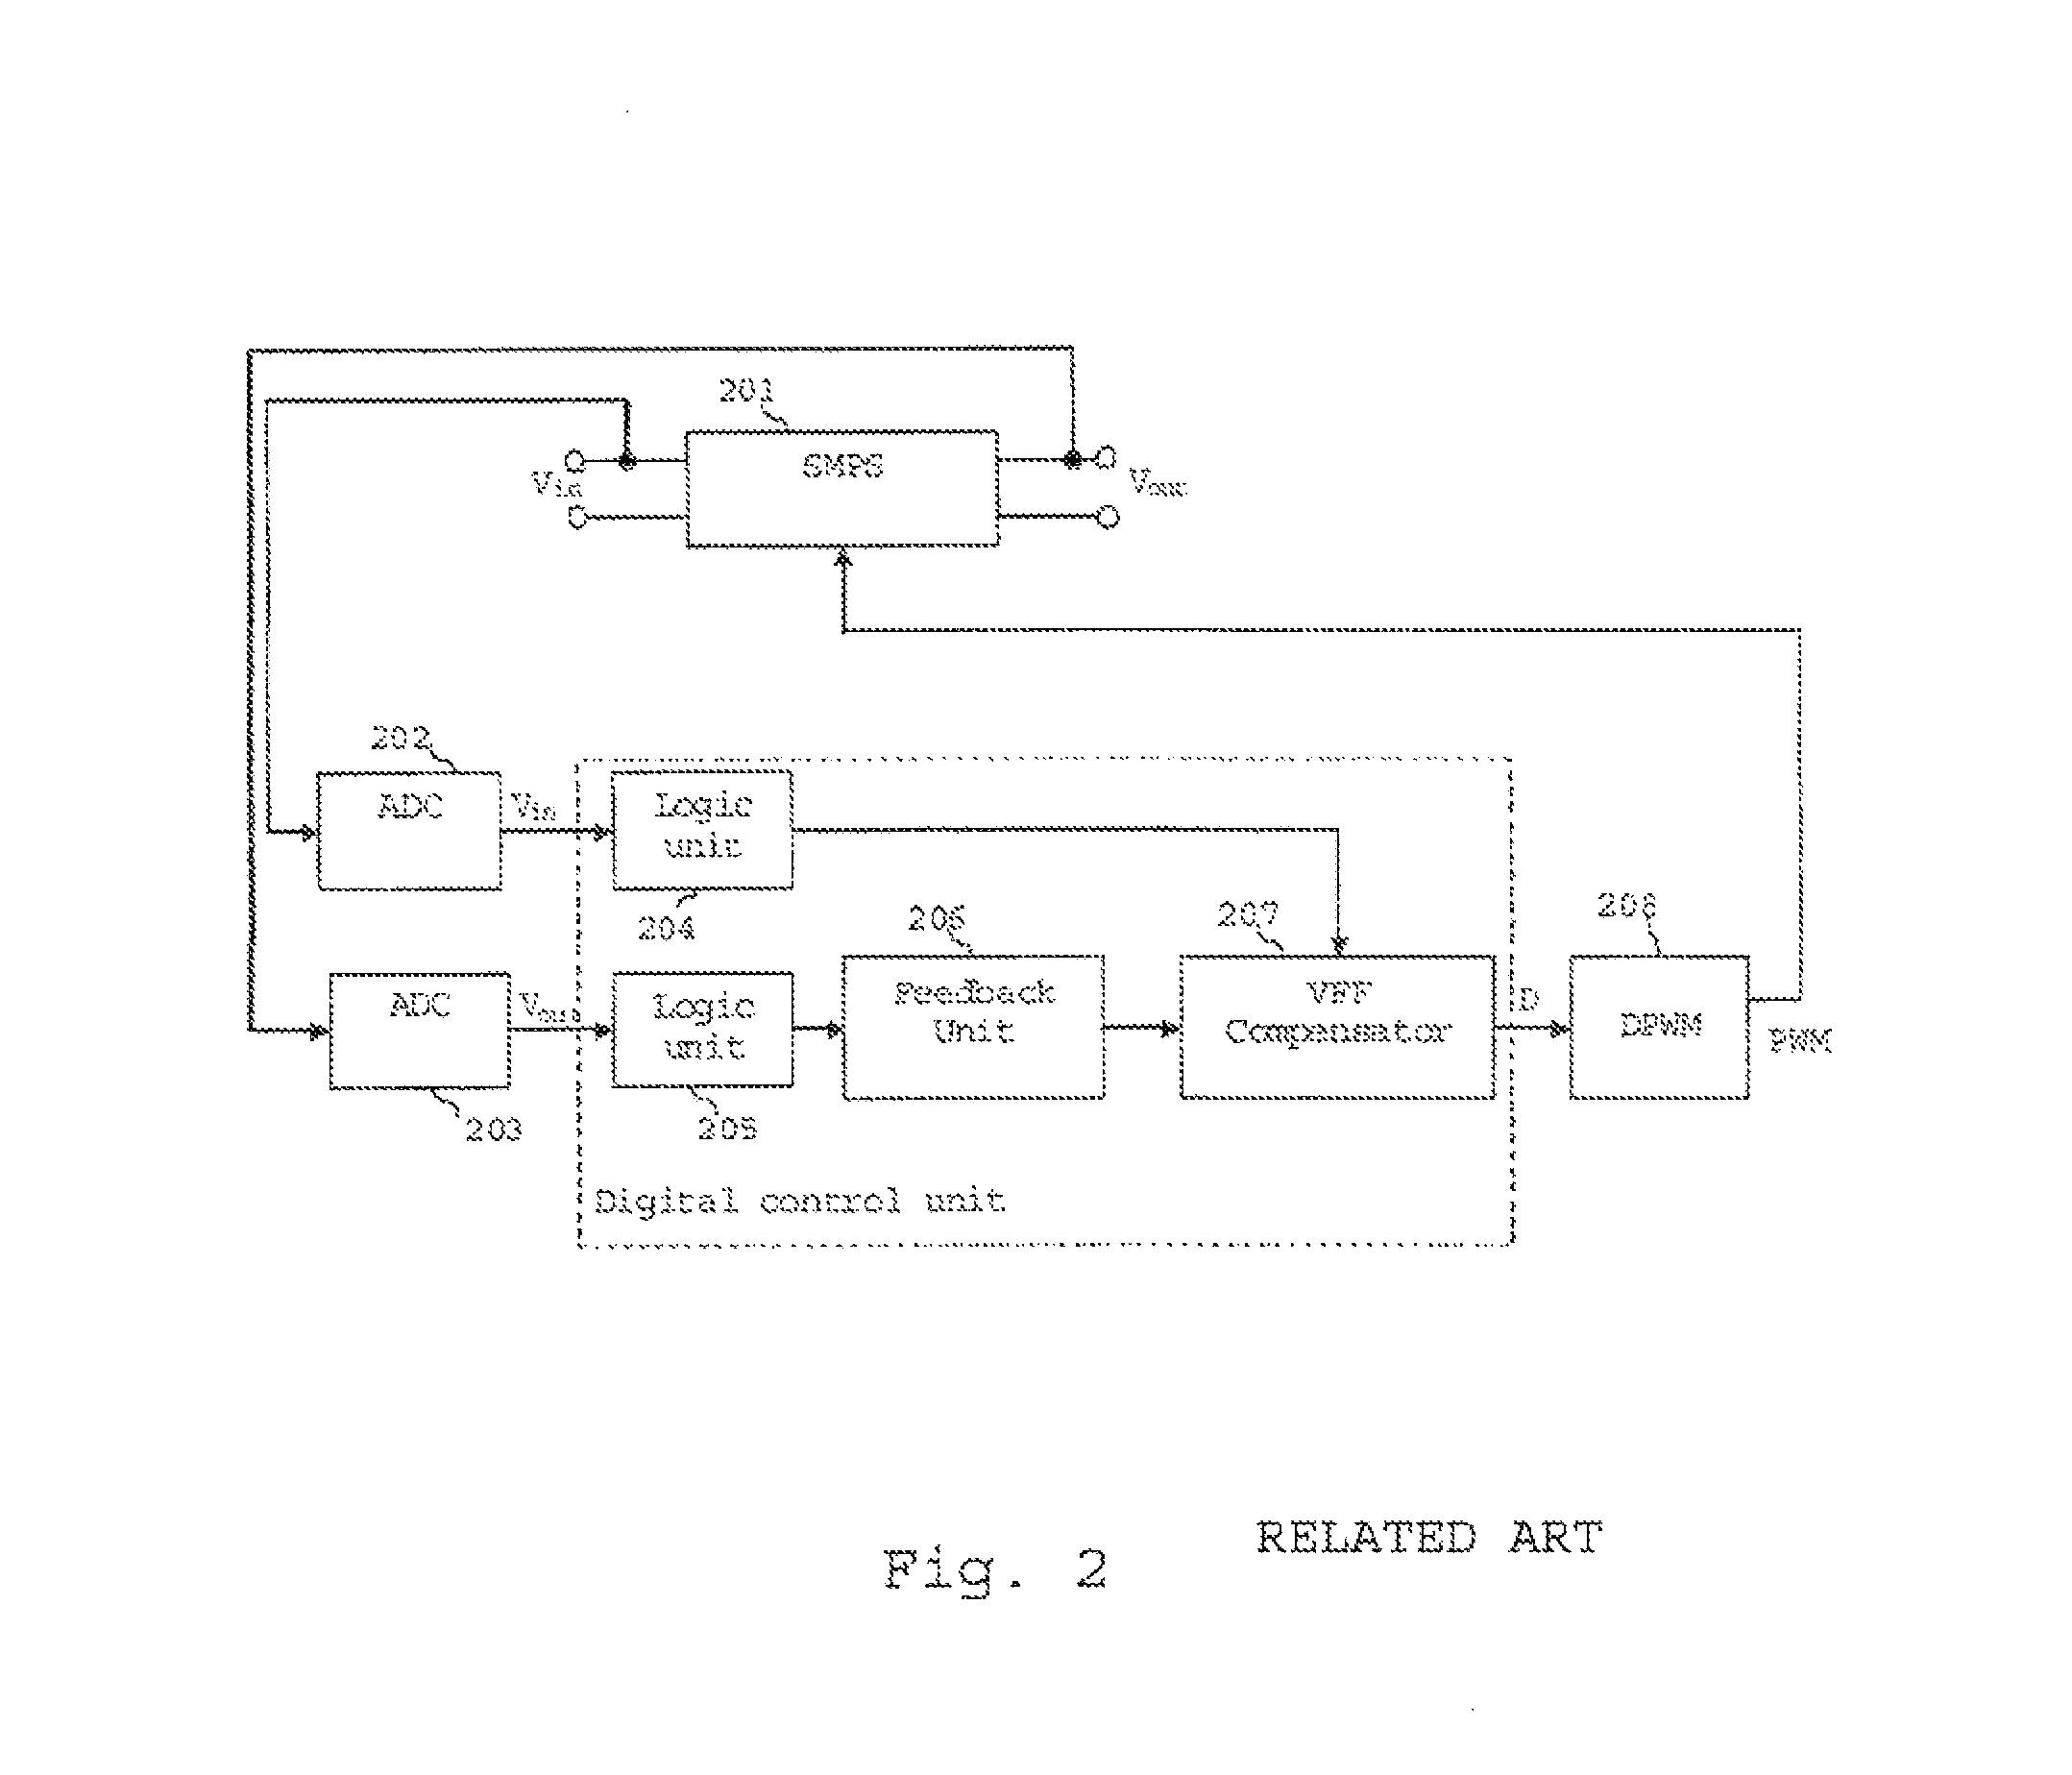 Digital control unit having a transient detector for controlling a switched mode power supply